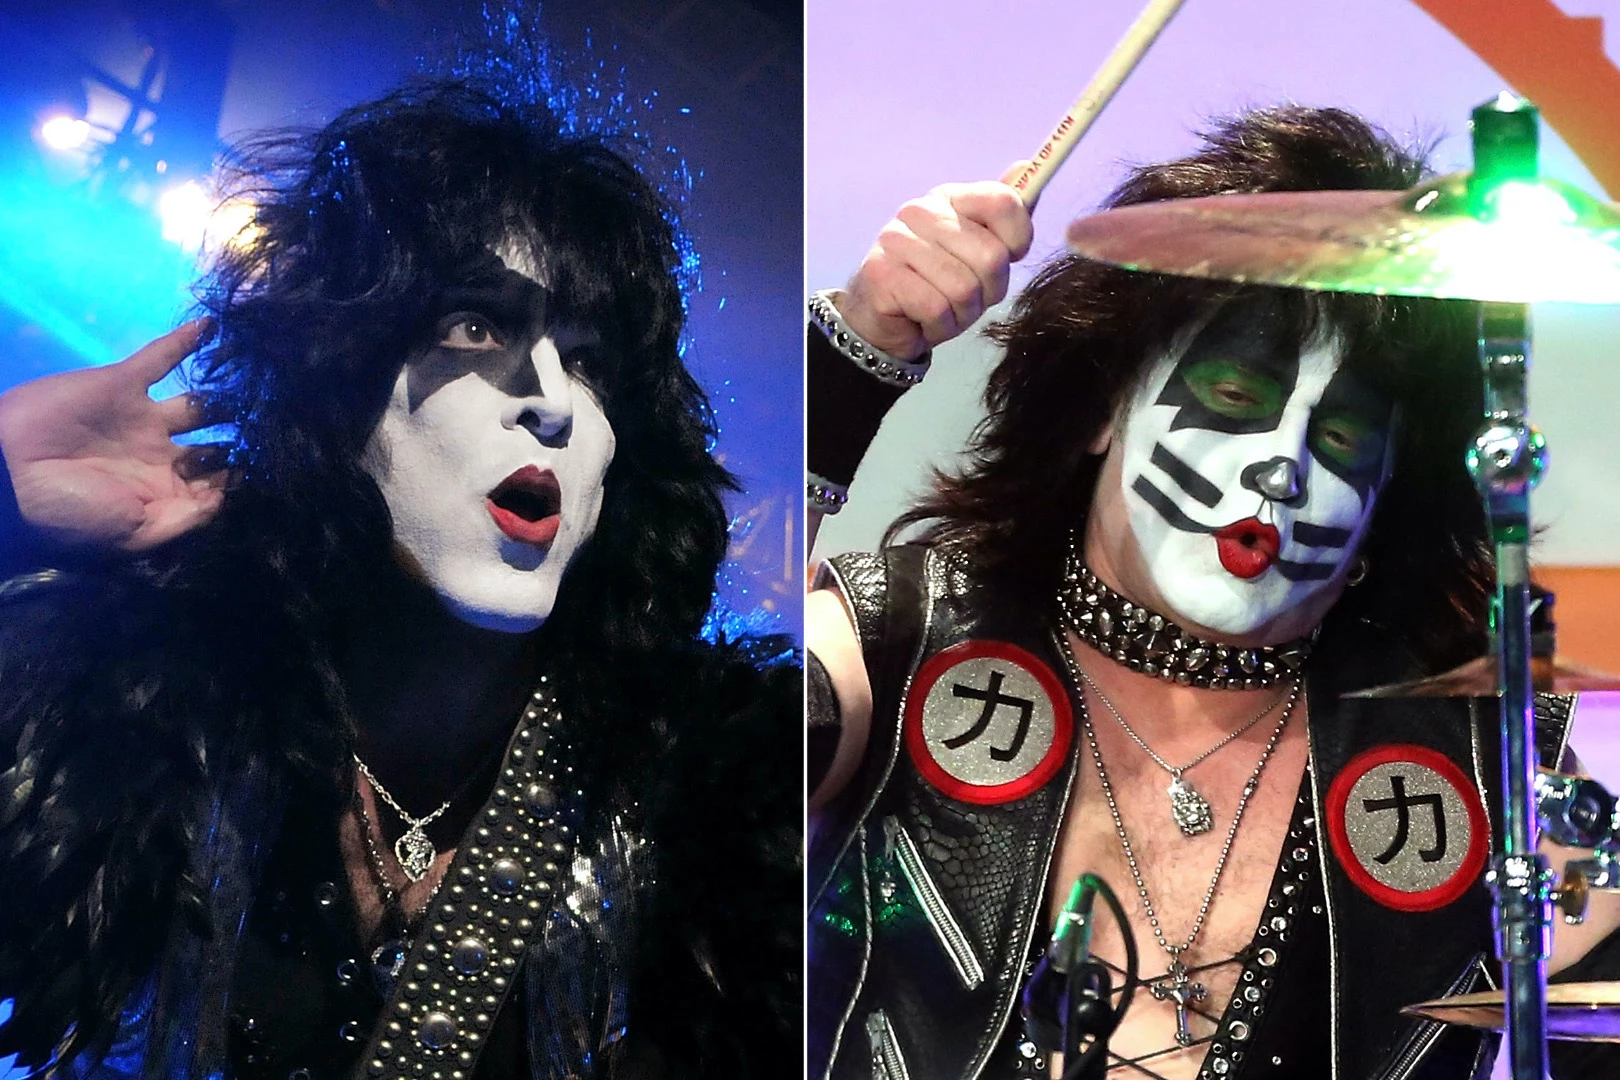 KISS Drummer Makes Mistake, Band's Backing Vocal Tracks Exposed